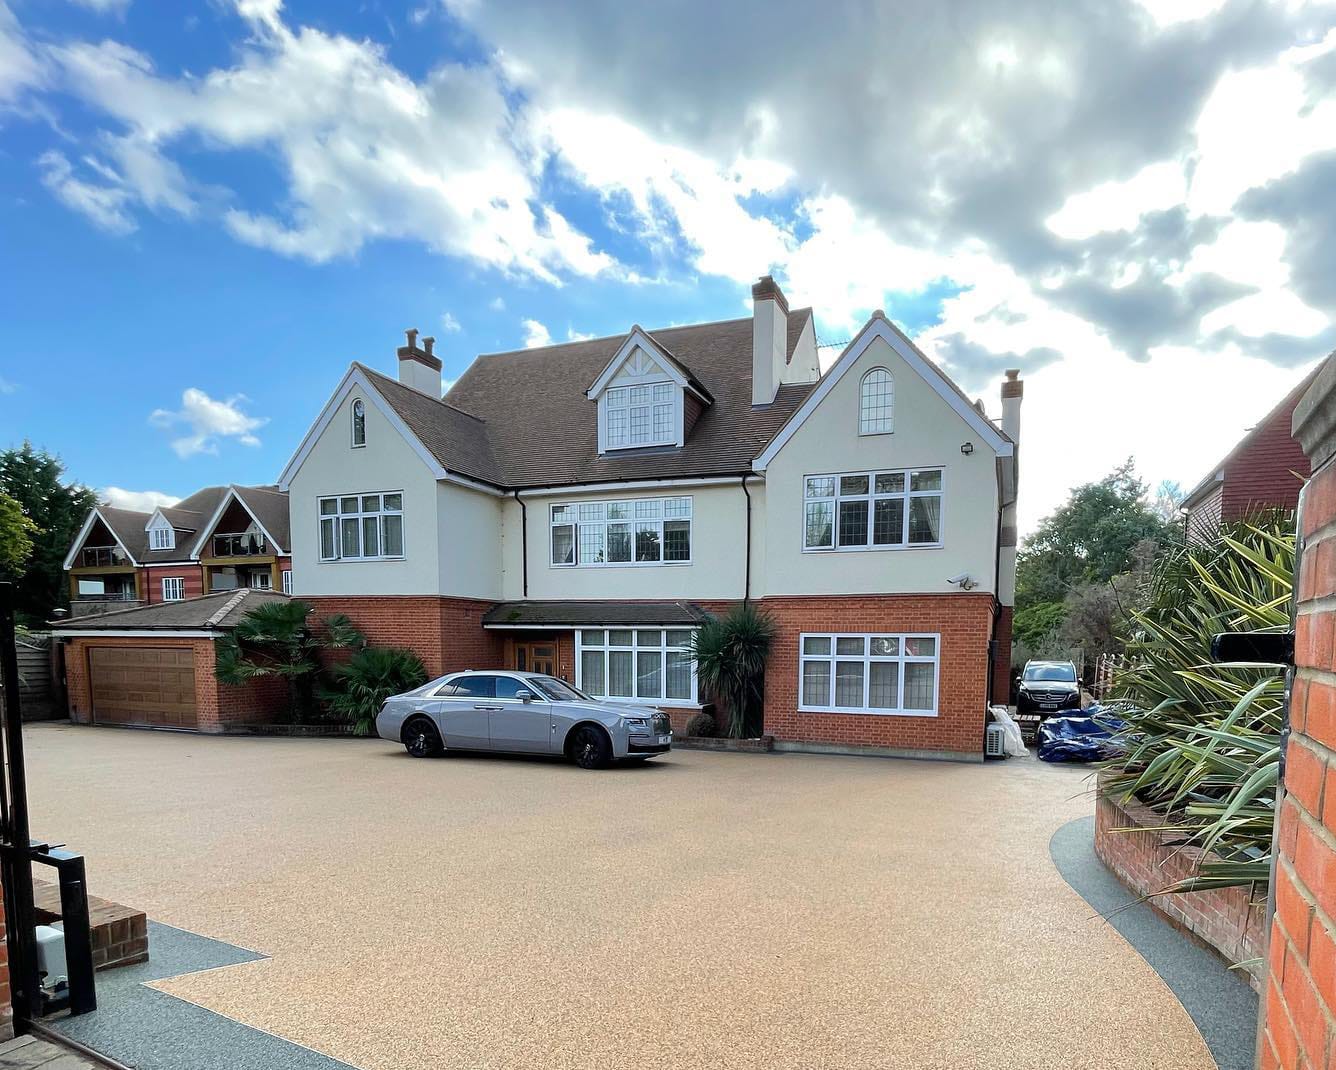 large 3 story detatched house with resin driveway and car